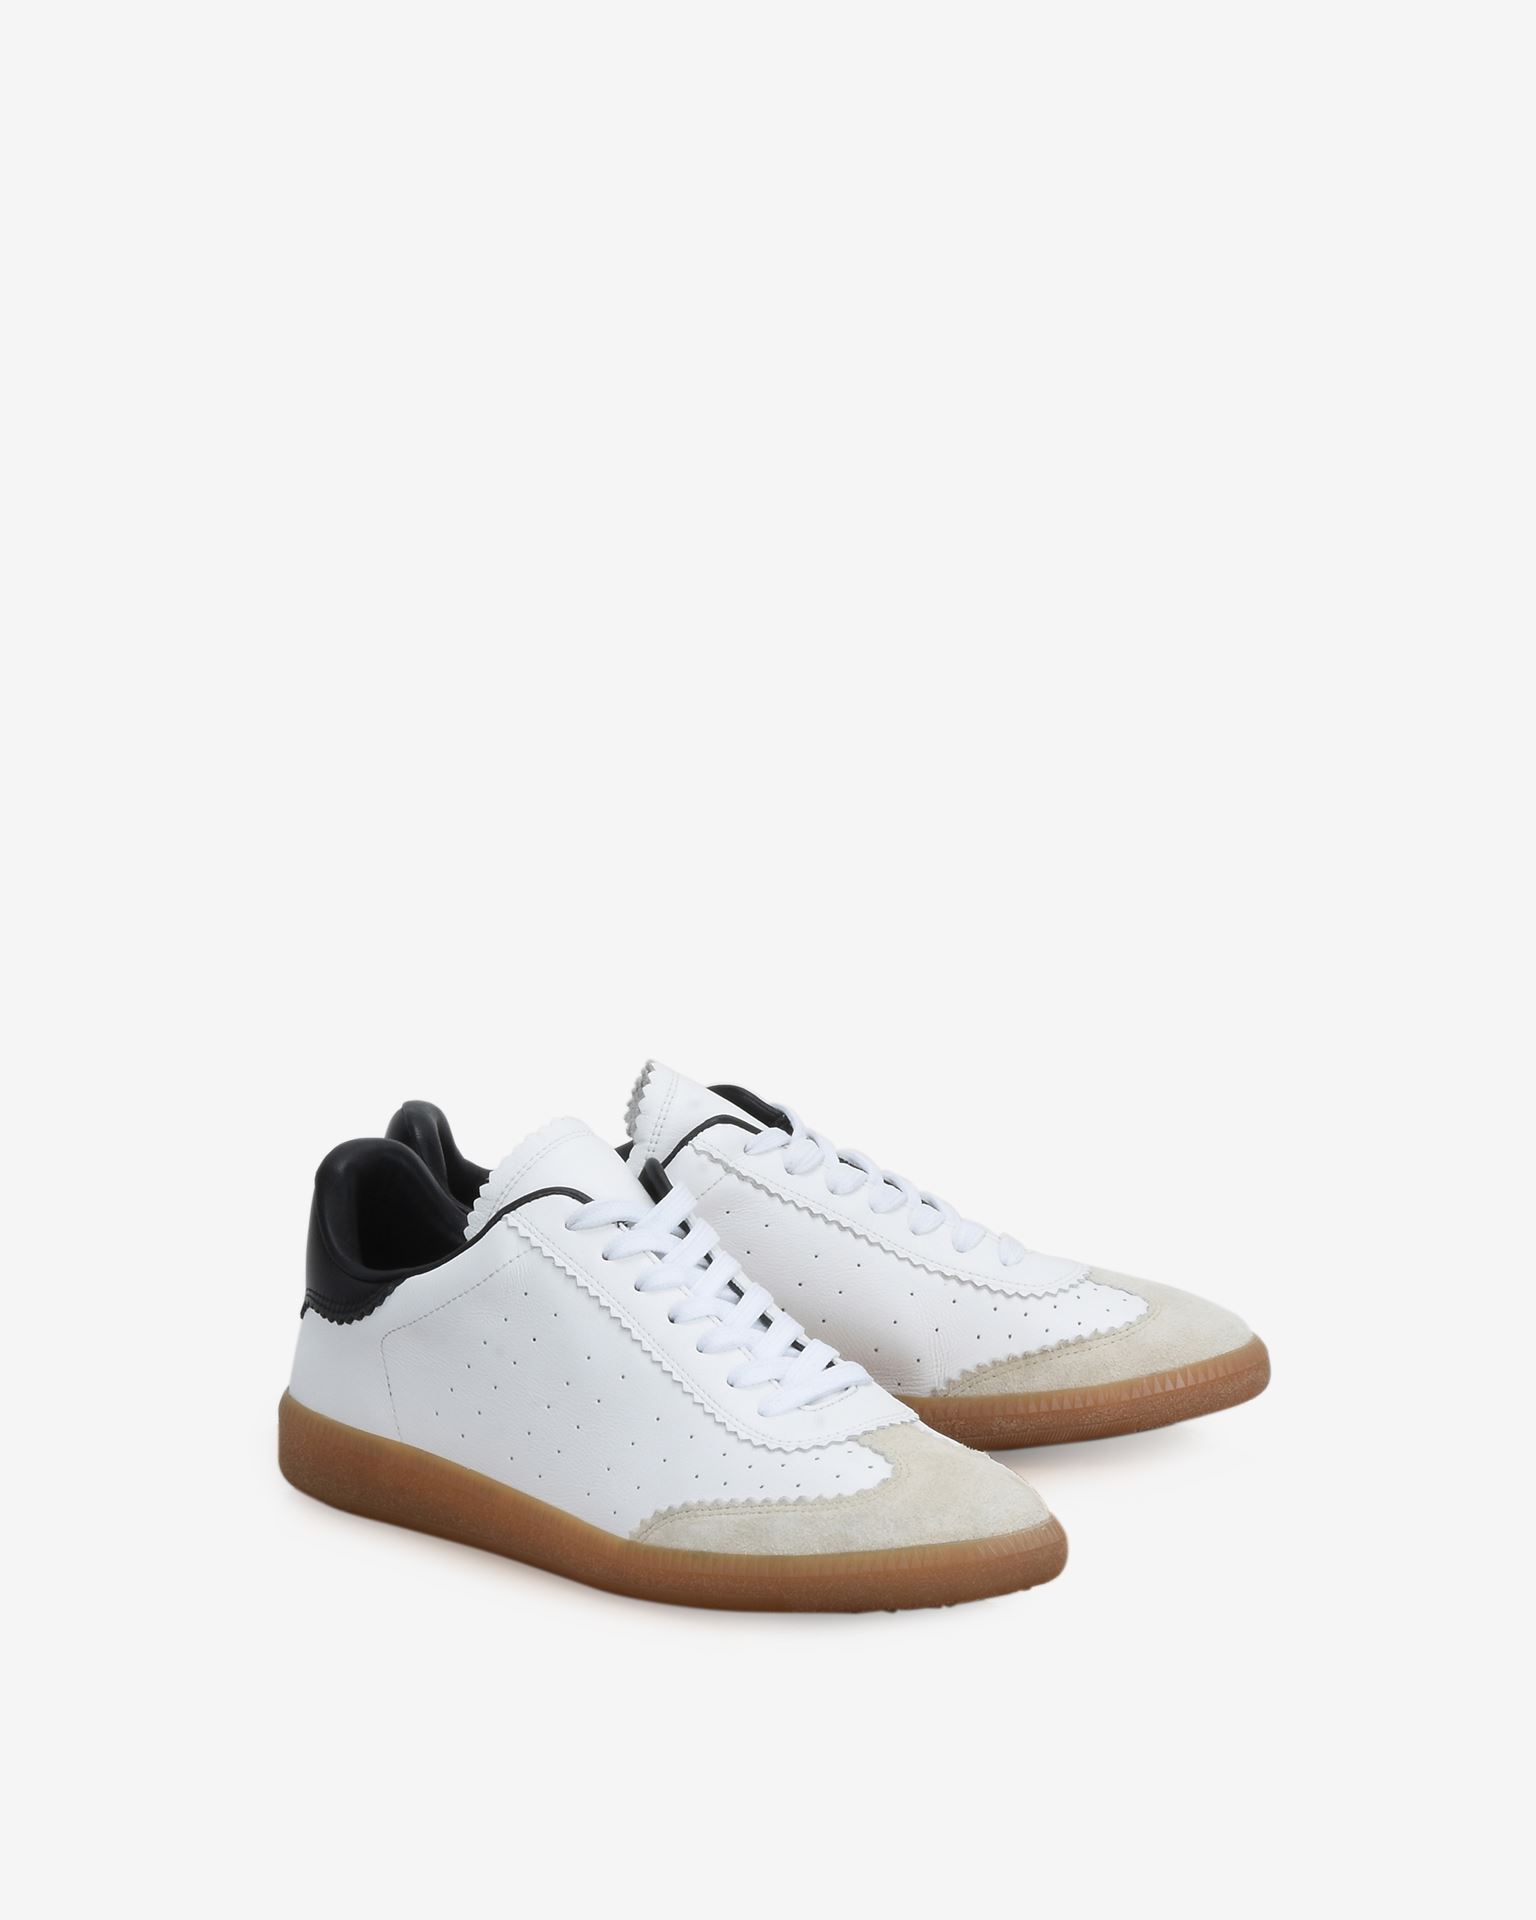 Isabel Marant, Bryce Leather Sneakers - Women - White